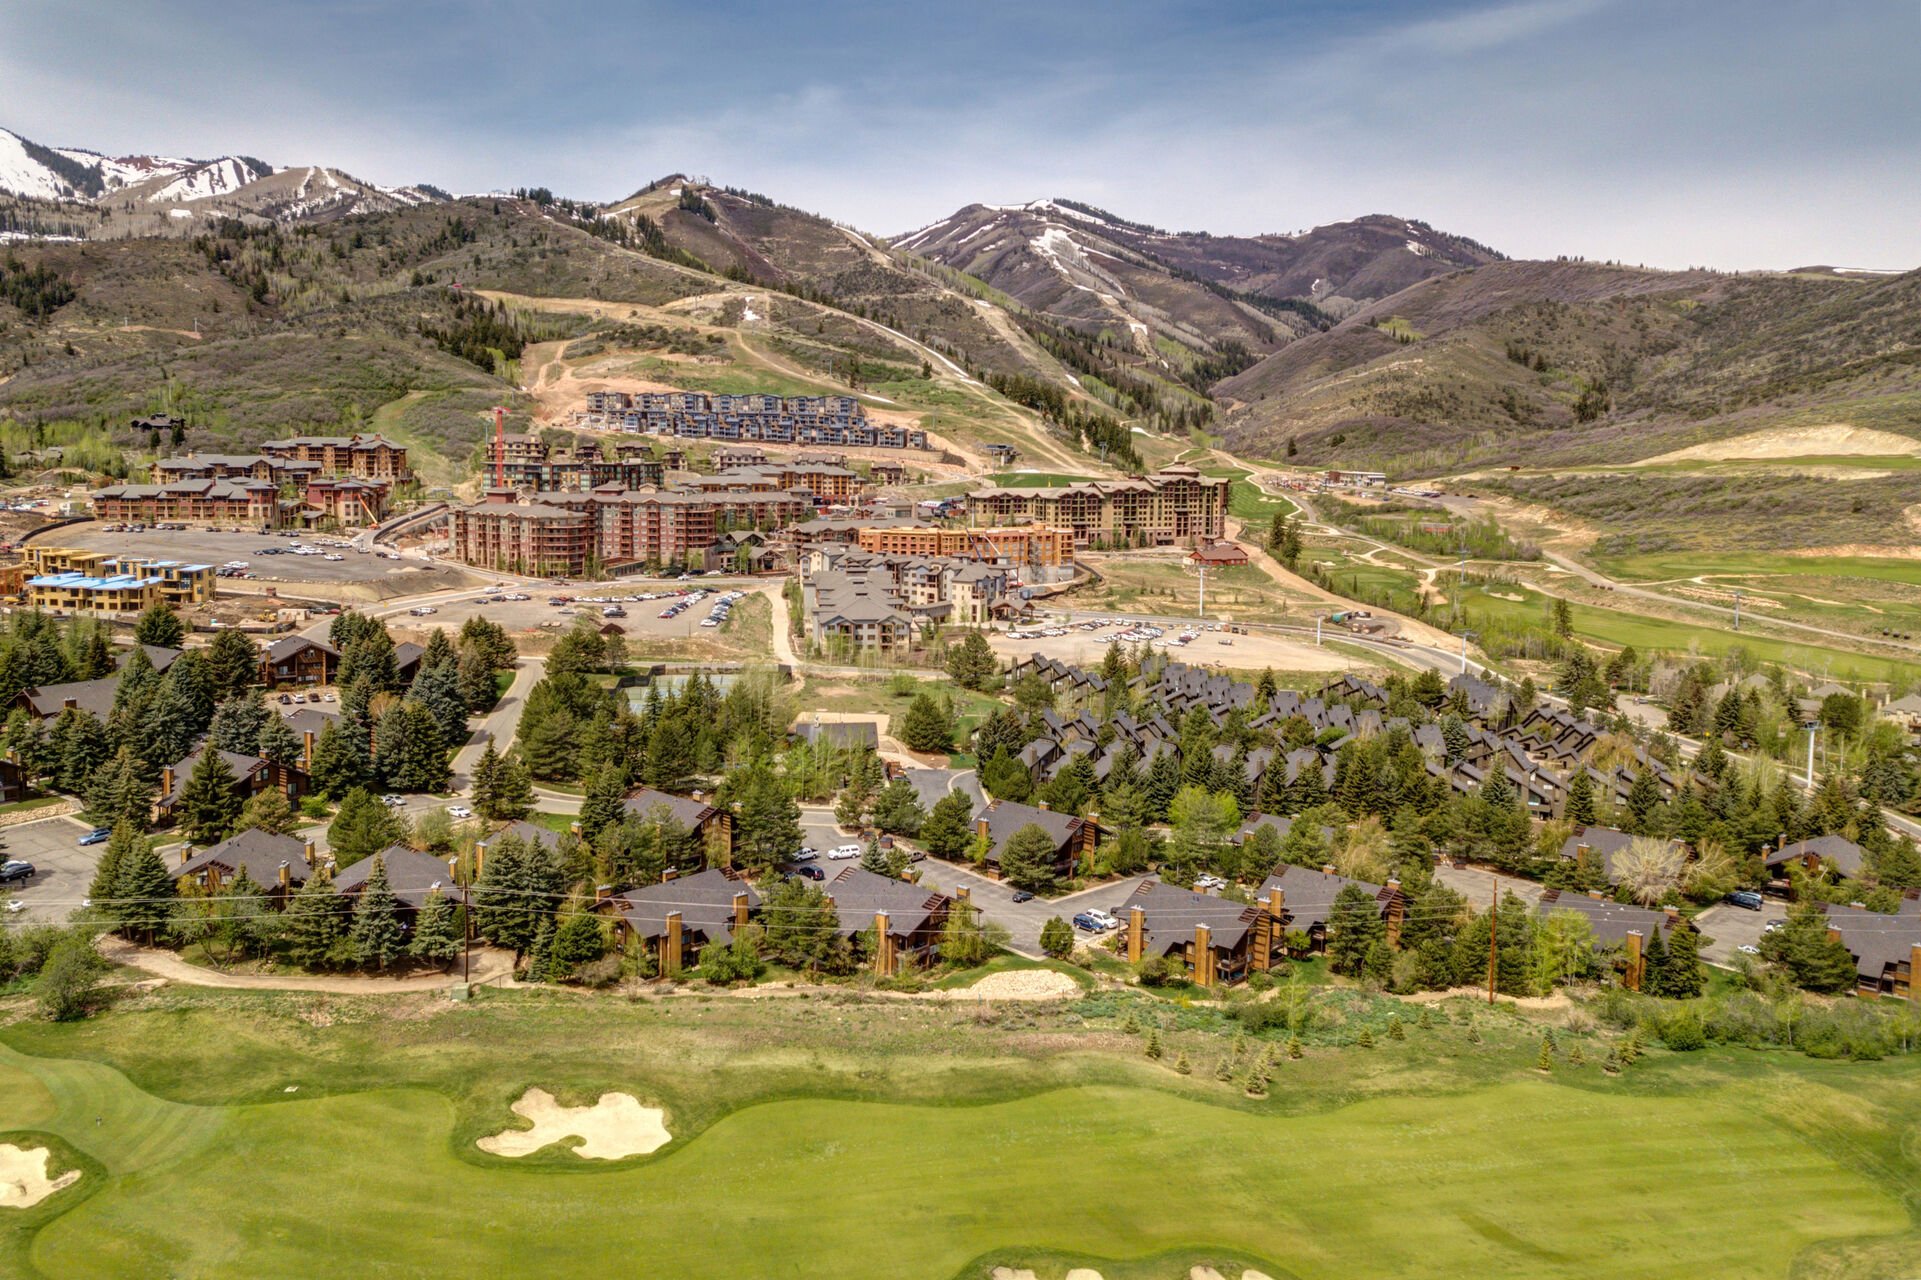 Birds Eye View of Red Pine Community and CanyonsVillage